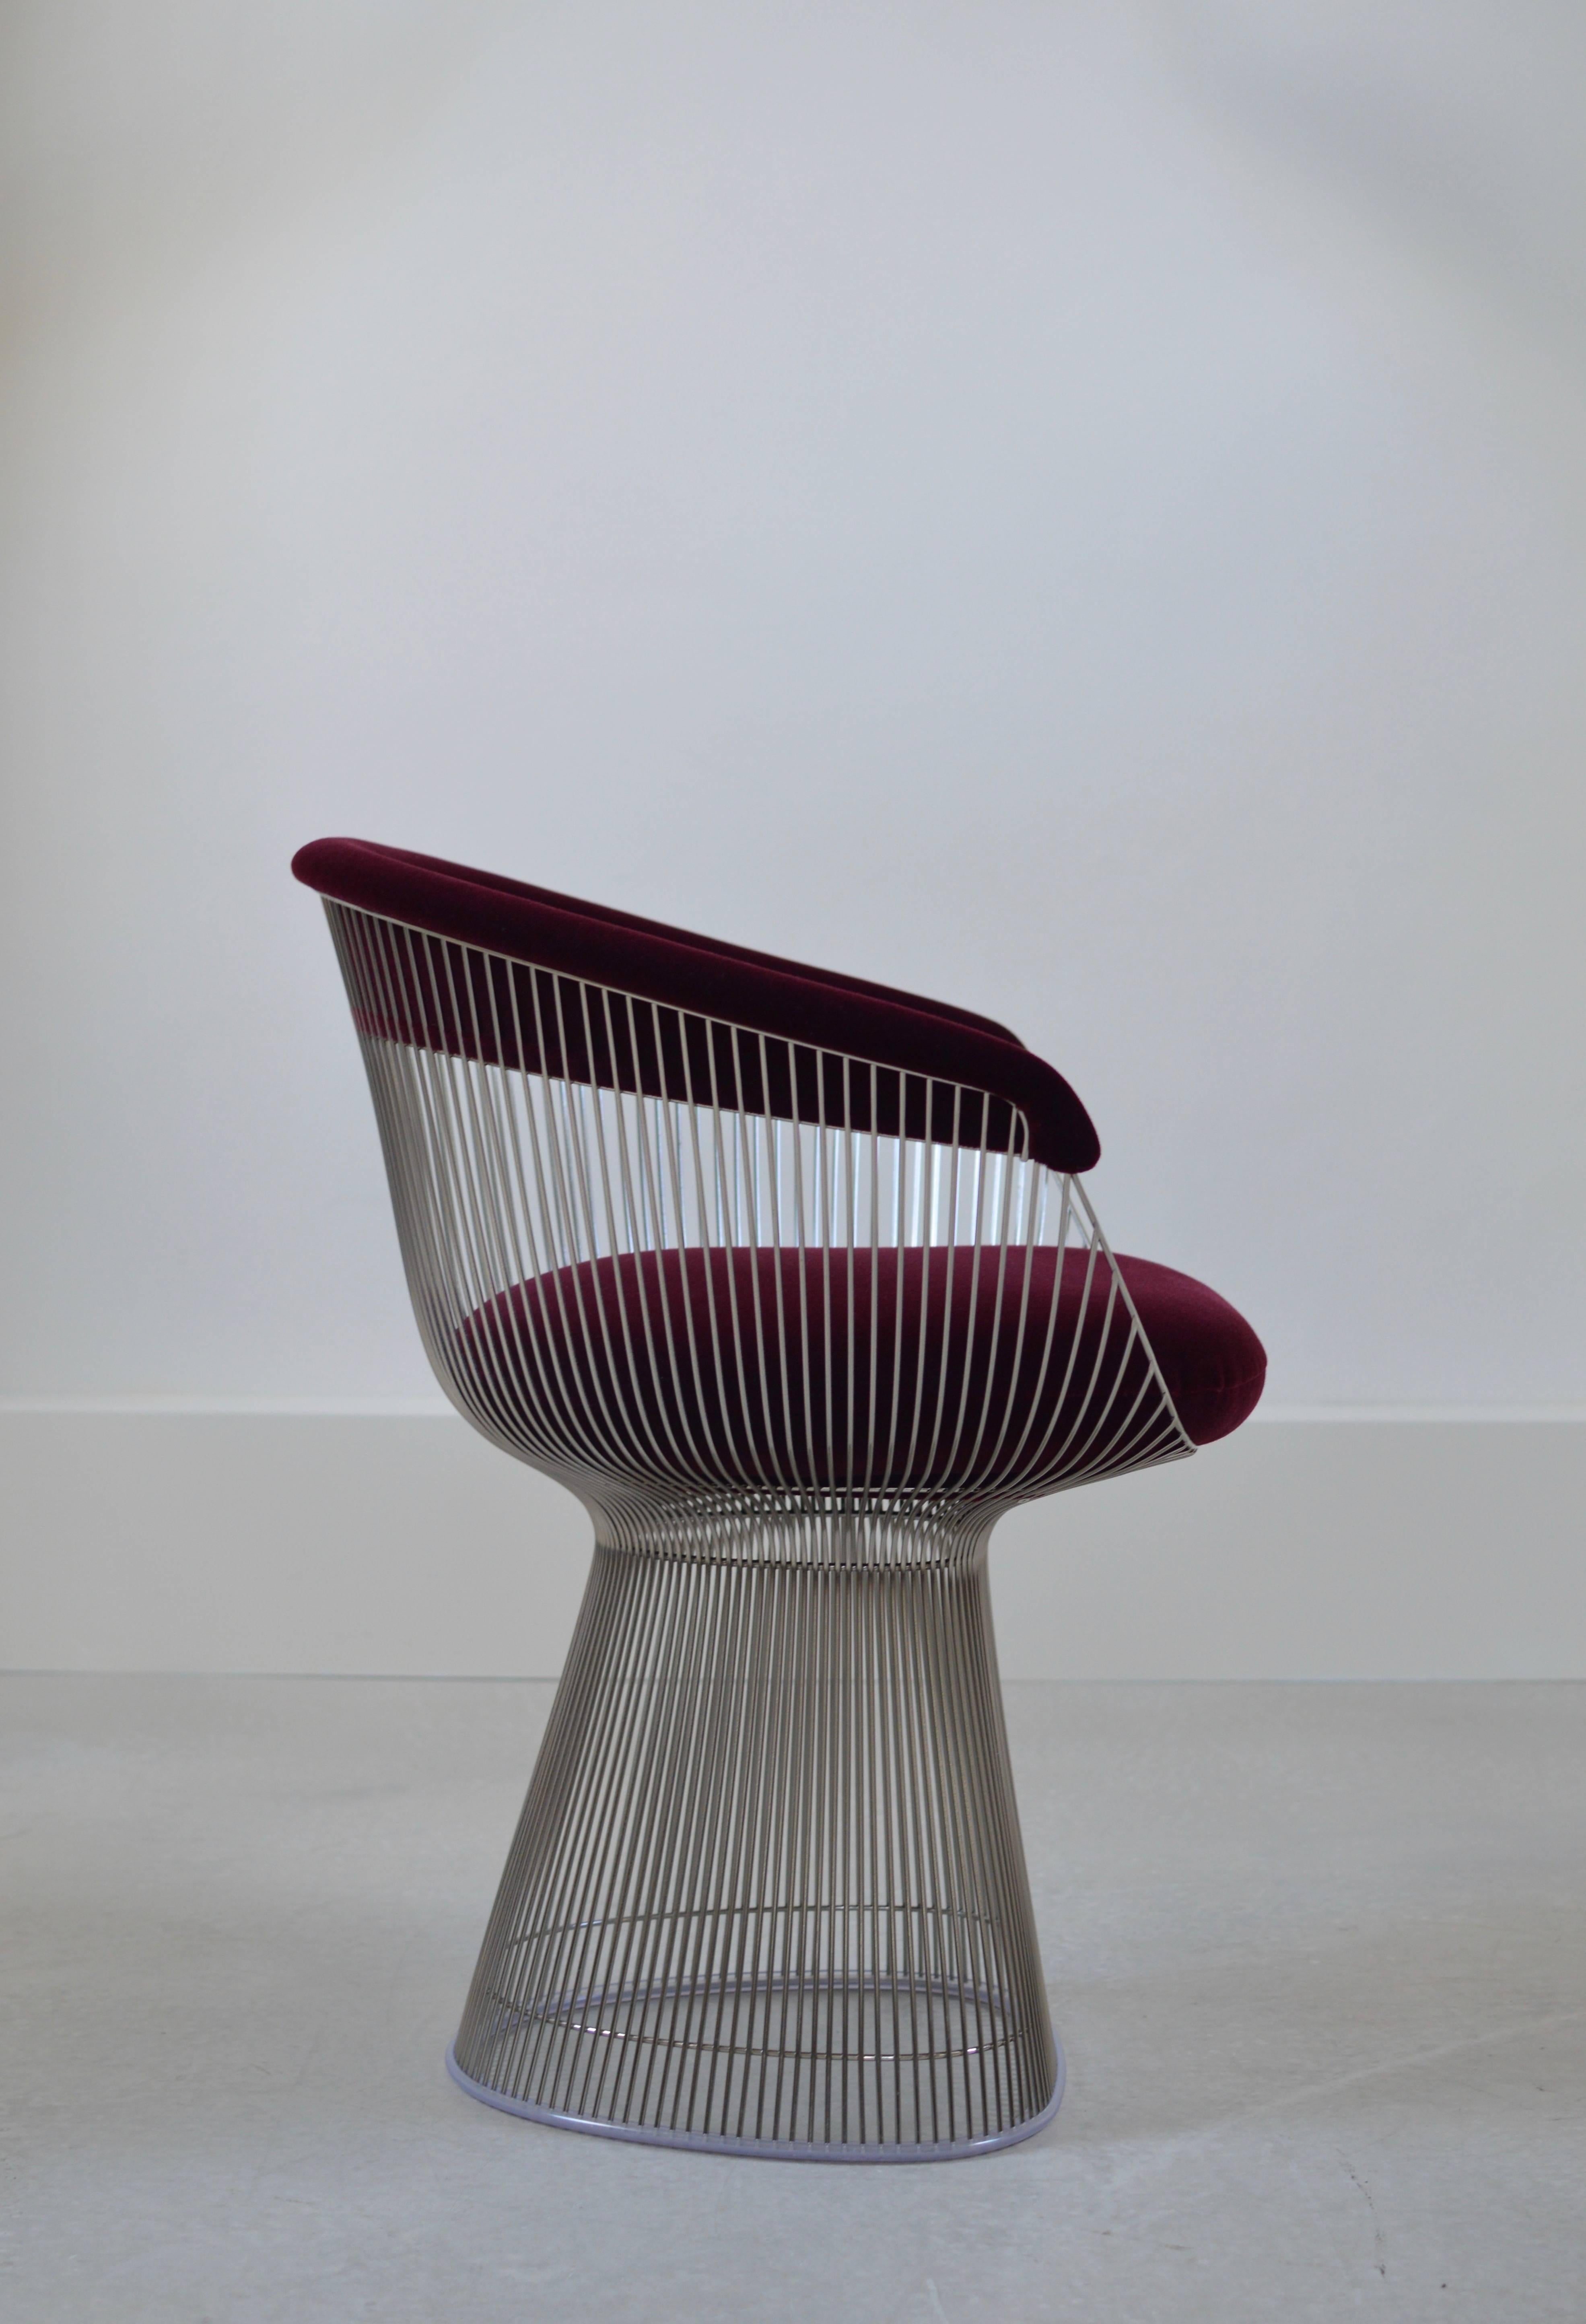 Sculptural and iconic wire side/dining chair by Warren Platner for Knoll International. 
Nickel-plated steel wire frame executed from as many as a 1000 welds with a mohair 'Knoll Velvet' upholstery in a distinct Burgundy color.
   